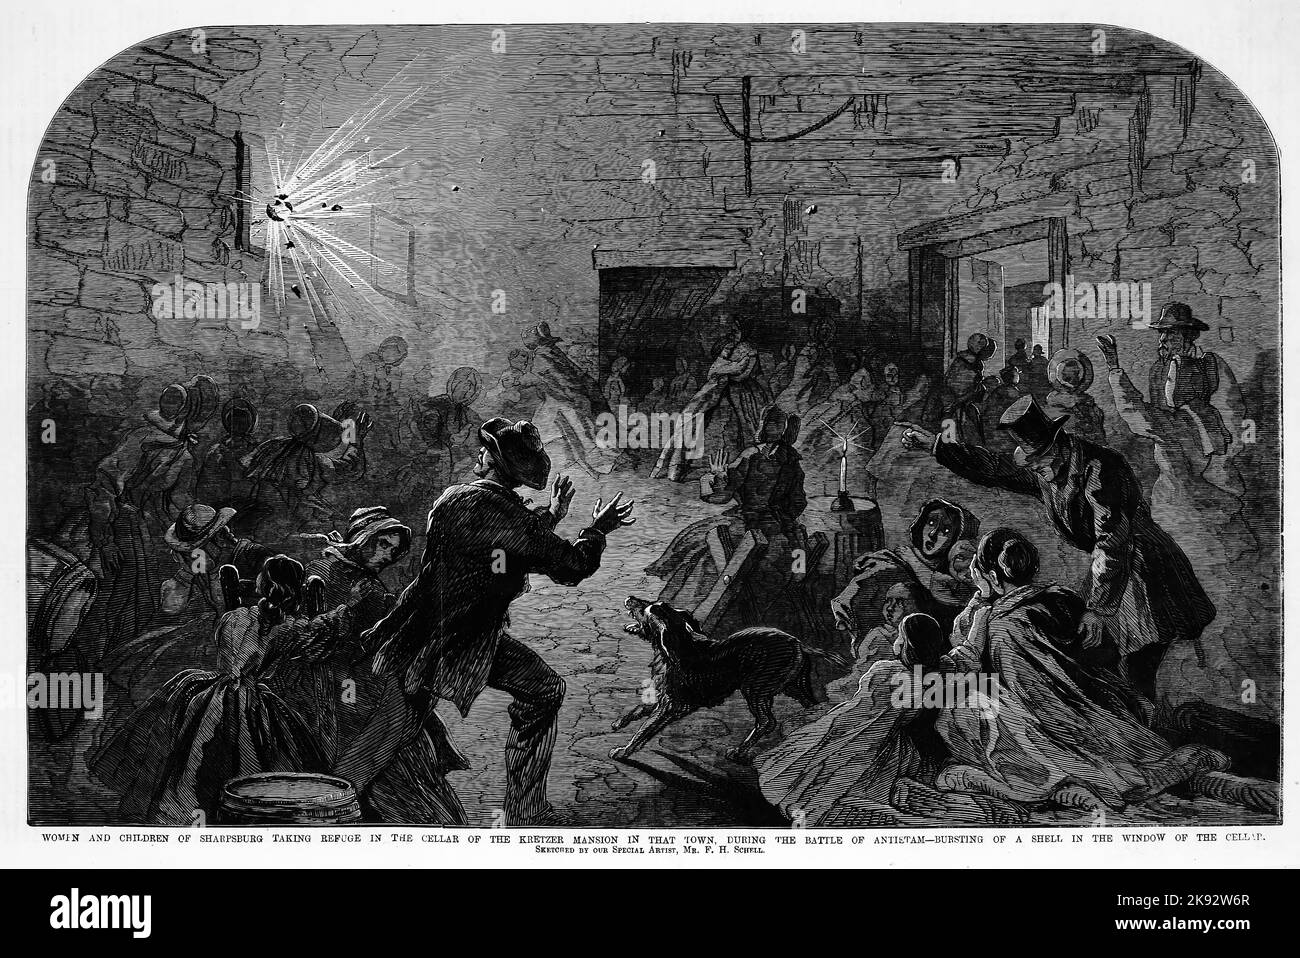 Women and children of Sharpsburg, Maryland, taking refuge in the cellar of the Kretzer Mansion in that town, during the Battle of Antietam - Bursting of a shell in the window of the cellar. September 1862. 19th century American Civil War illustration from Frank Leslie's Illustrated Newspaper Stock Photo